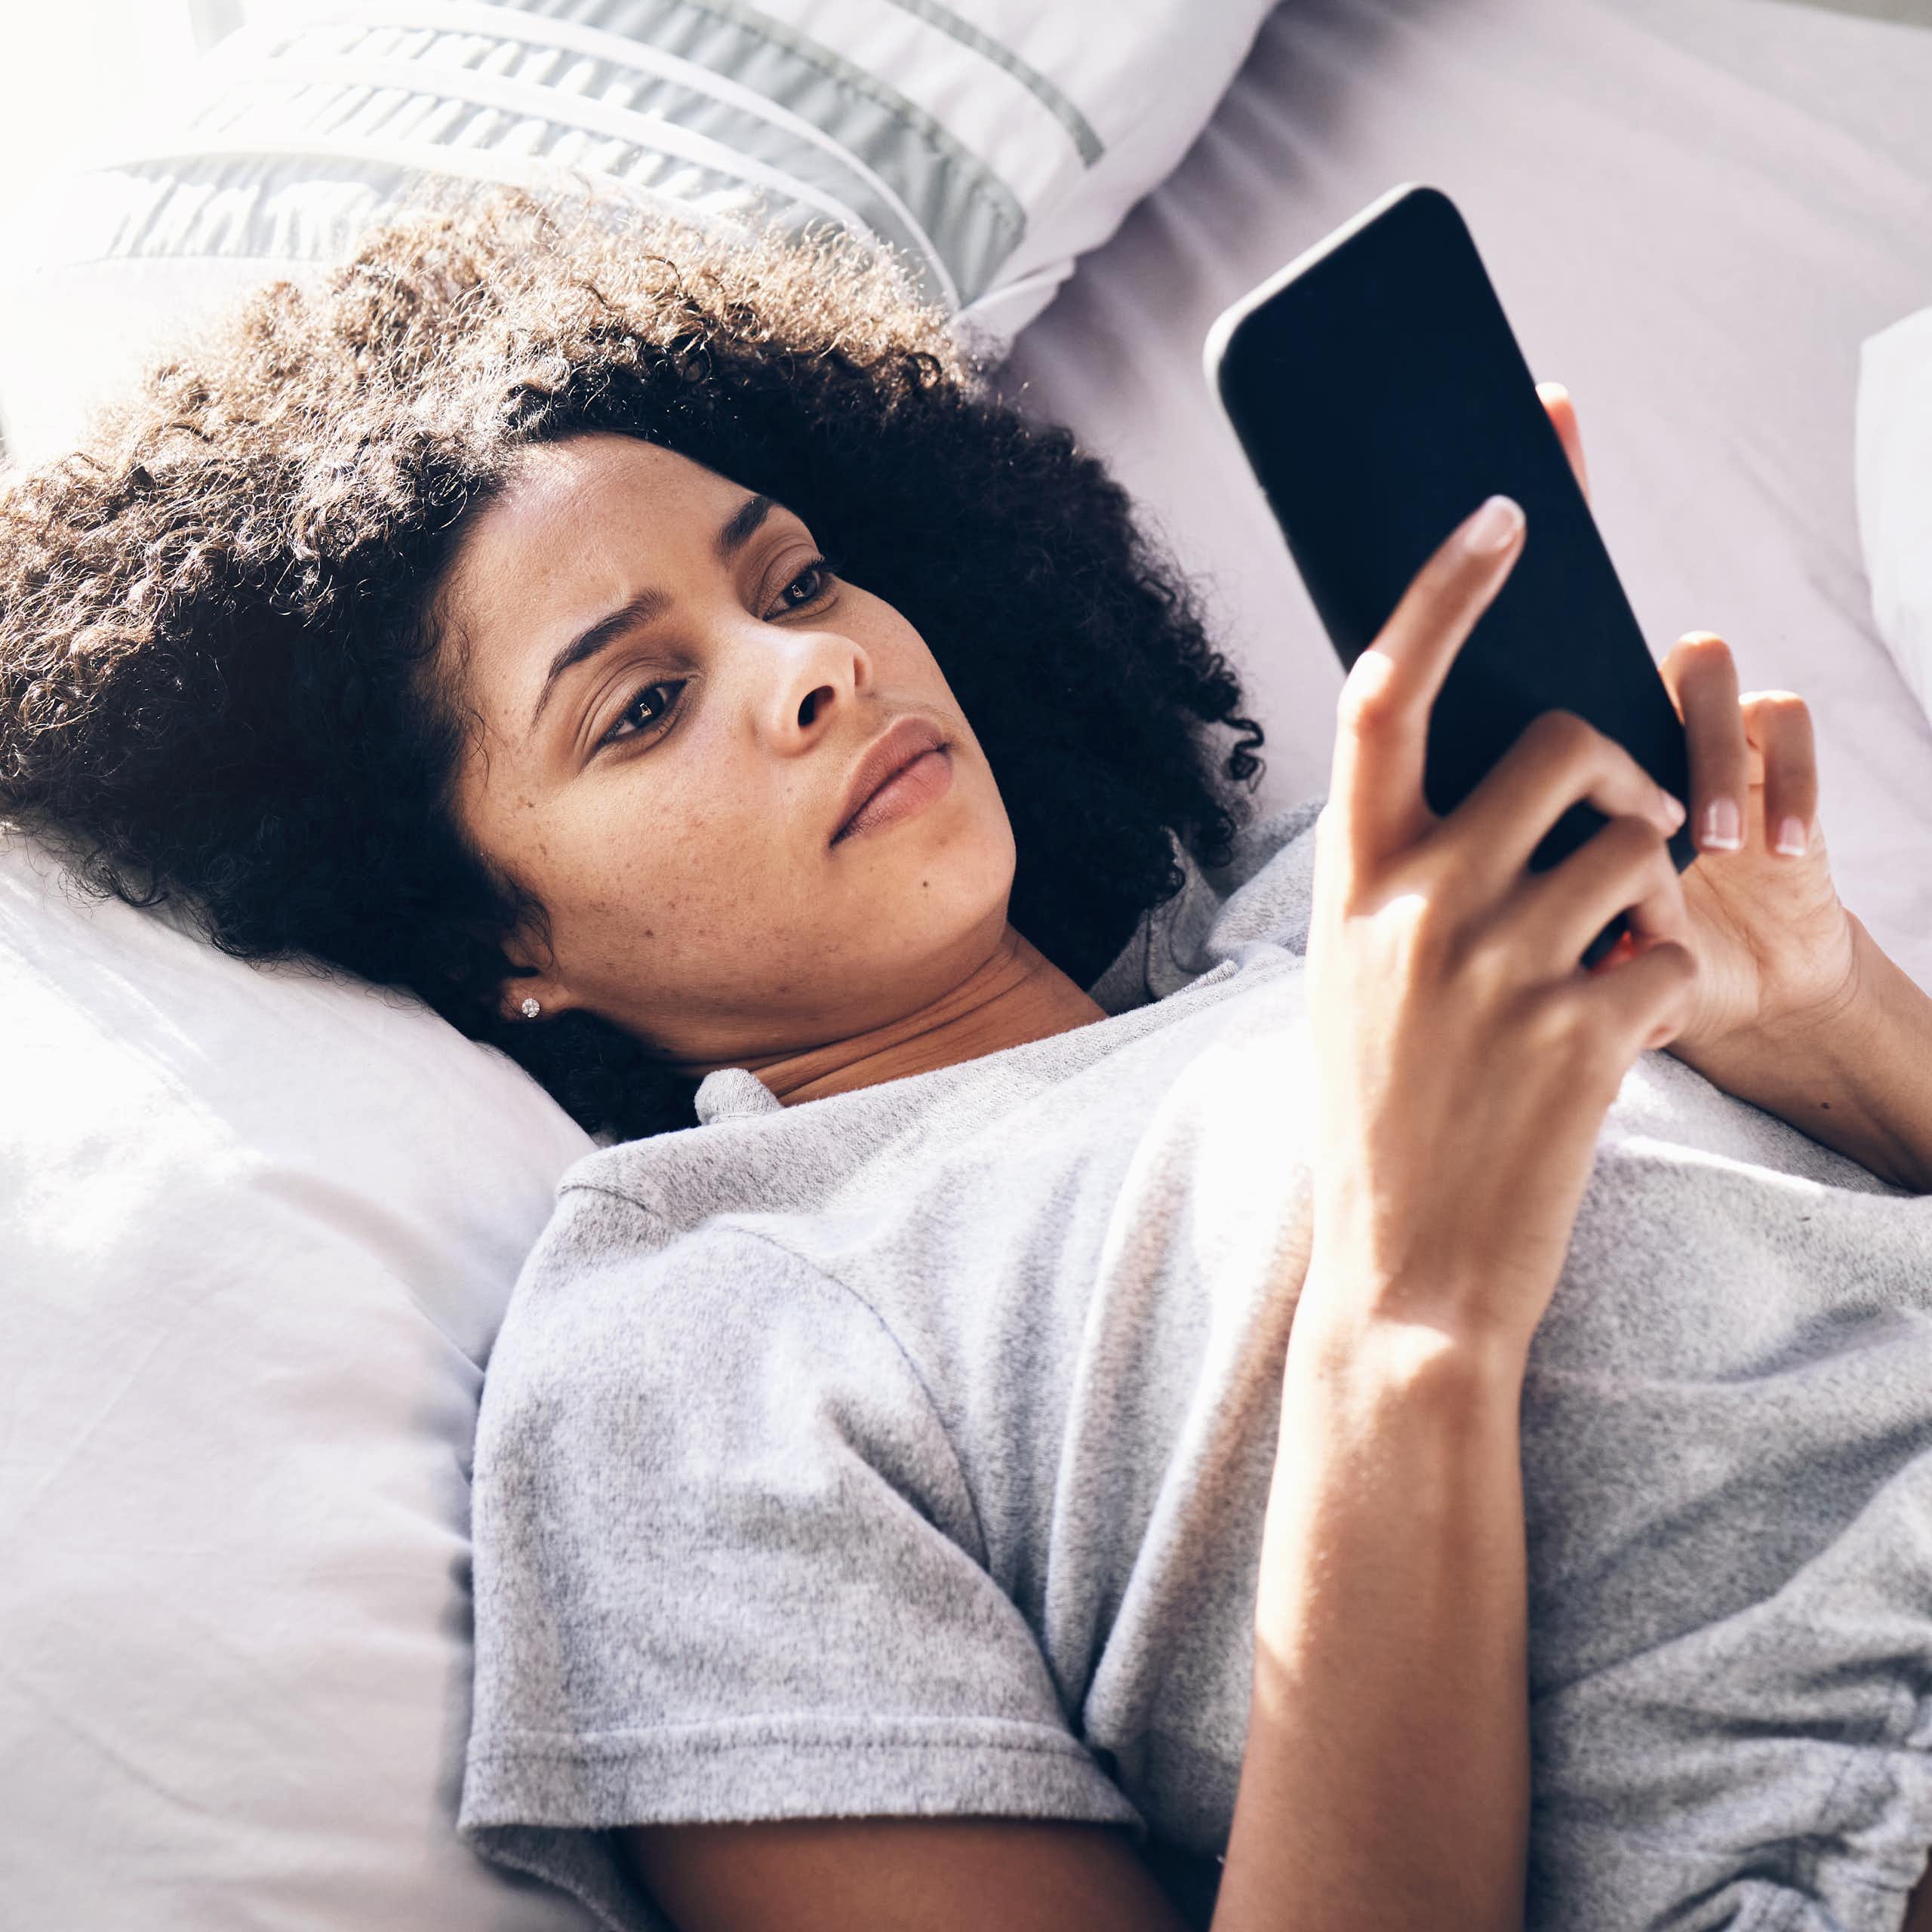 A young woman lying on a bed looking at a phone